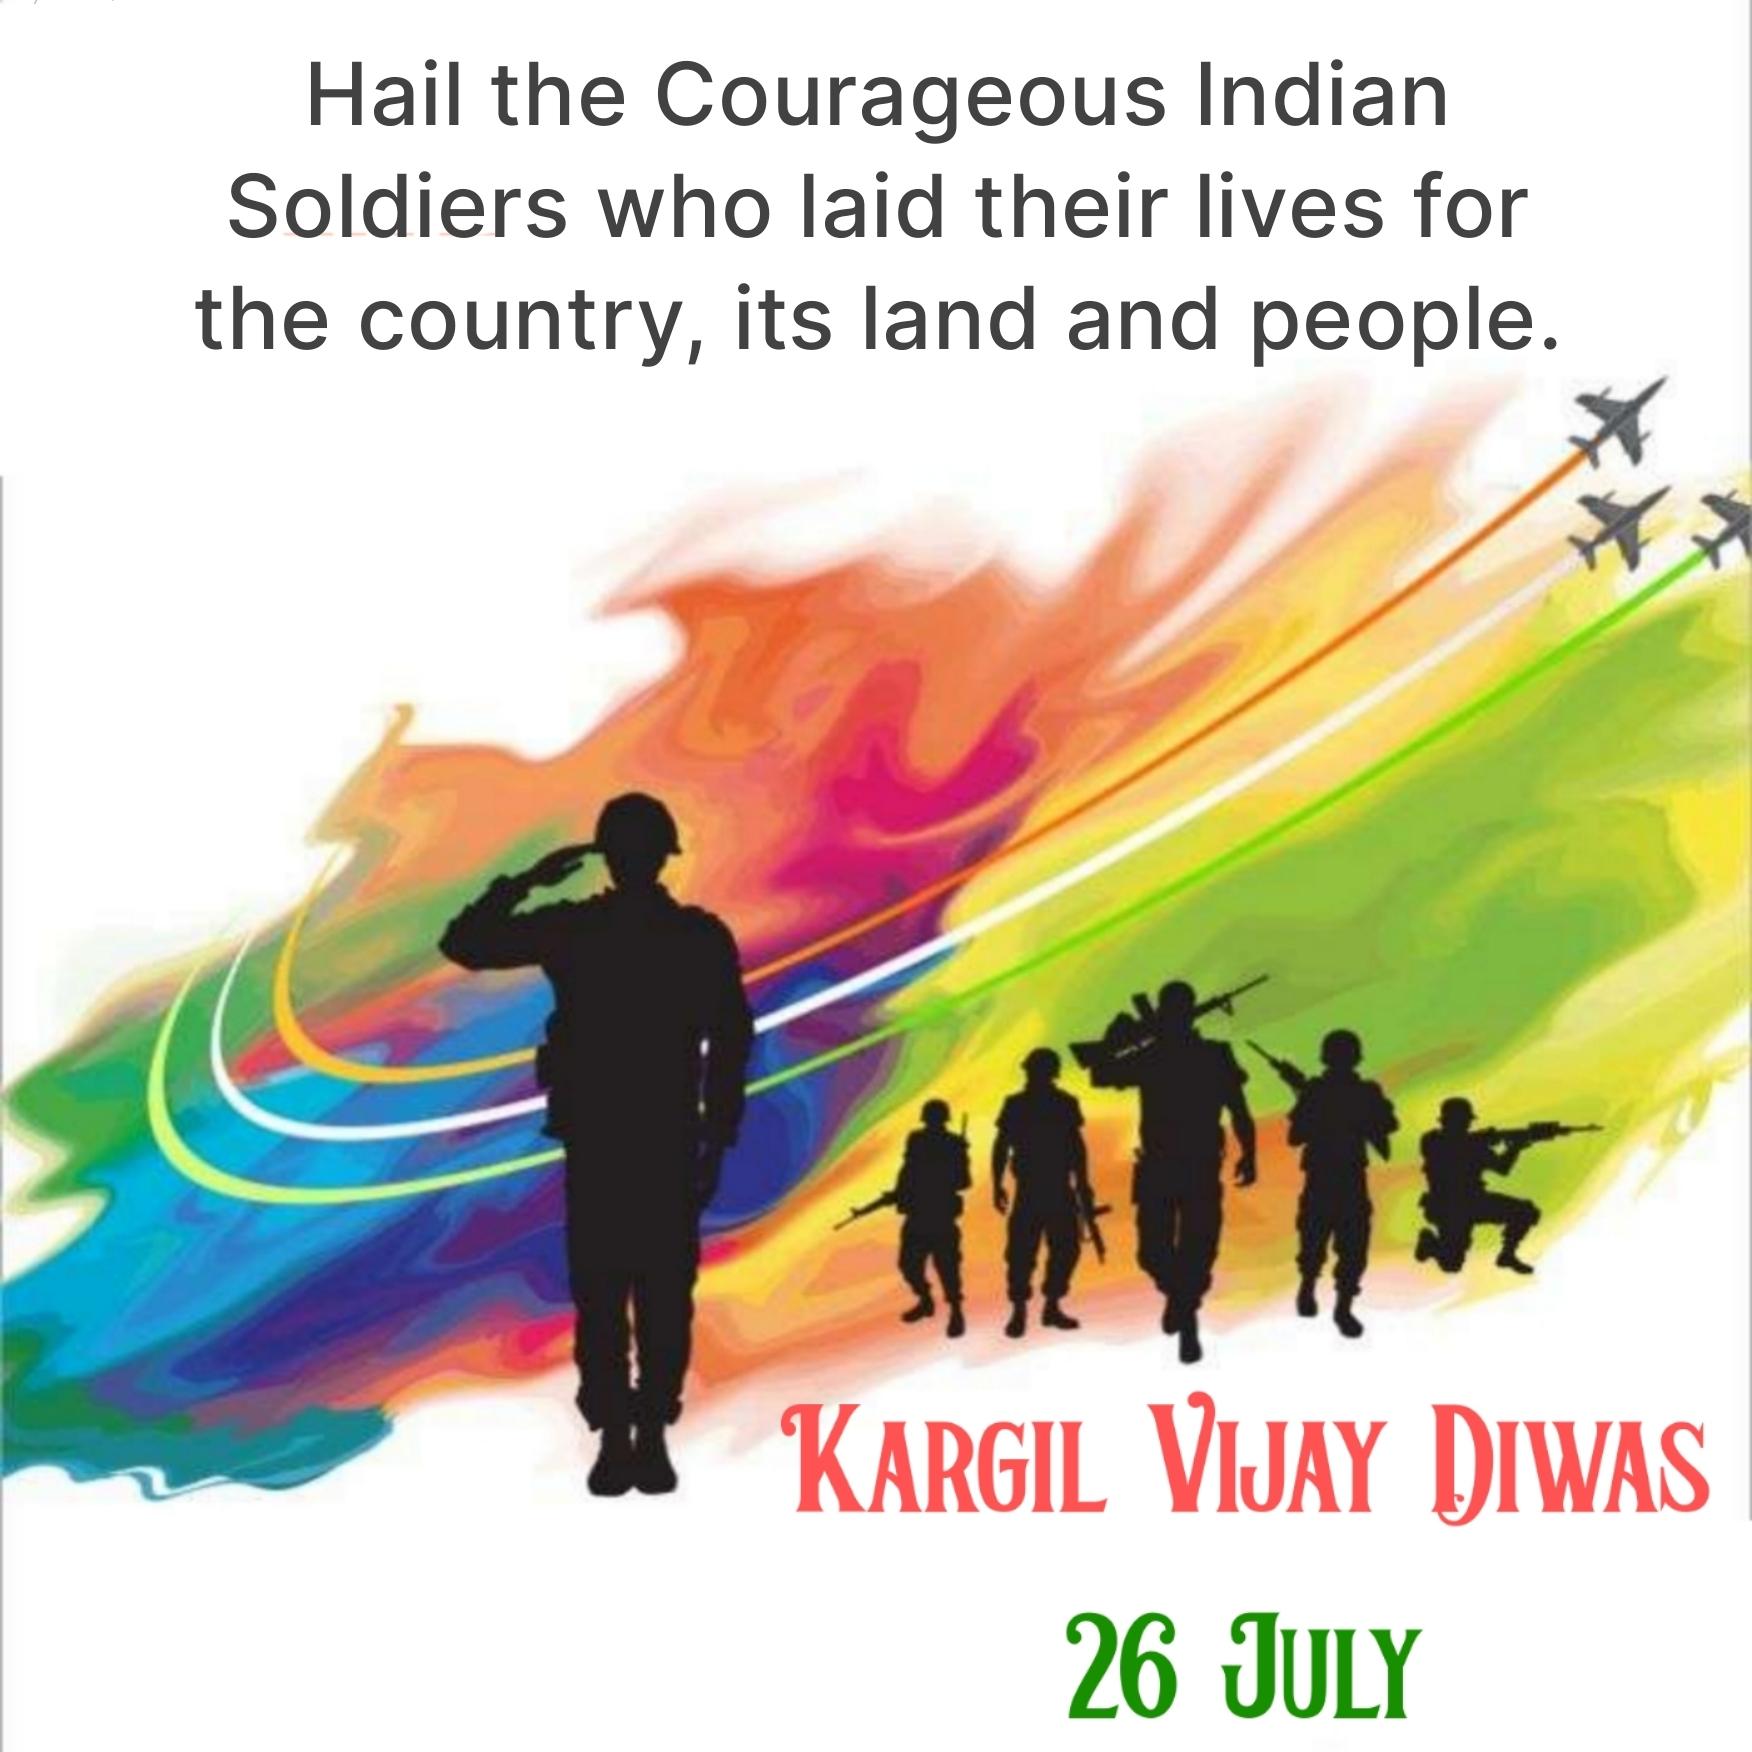 Hail the Courageous Indian Soldiers who laid their lives